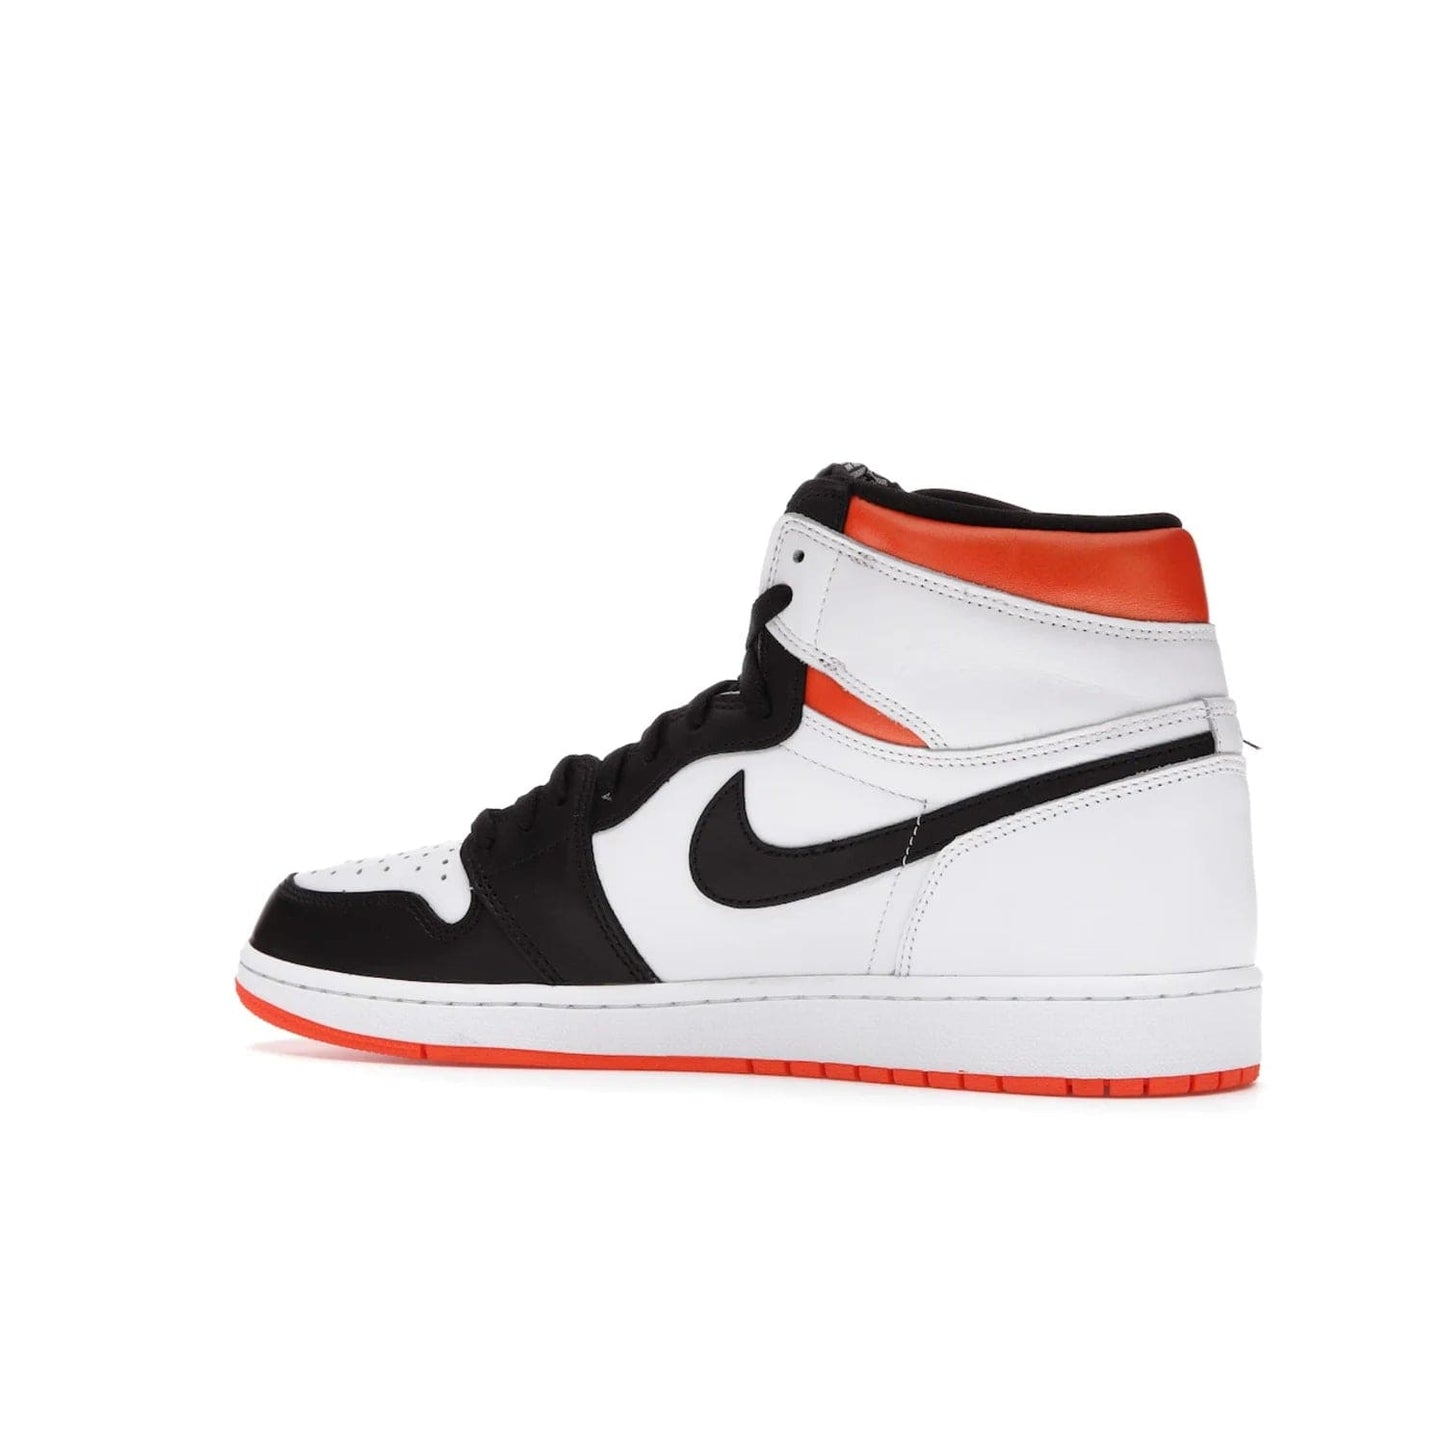 Jordan 1 Retro High Electro Orange - Image 22 - Only at www.BallersClubKickz.com - This Air Jordan 1 Retro High Electro Orange features a white leather upper with black overlays and vibrant Hyper Orange ankle wrap. Turn heads with this iconic design of woven tongue label and sole. Get yours today and add some serious style to your rotation.